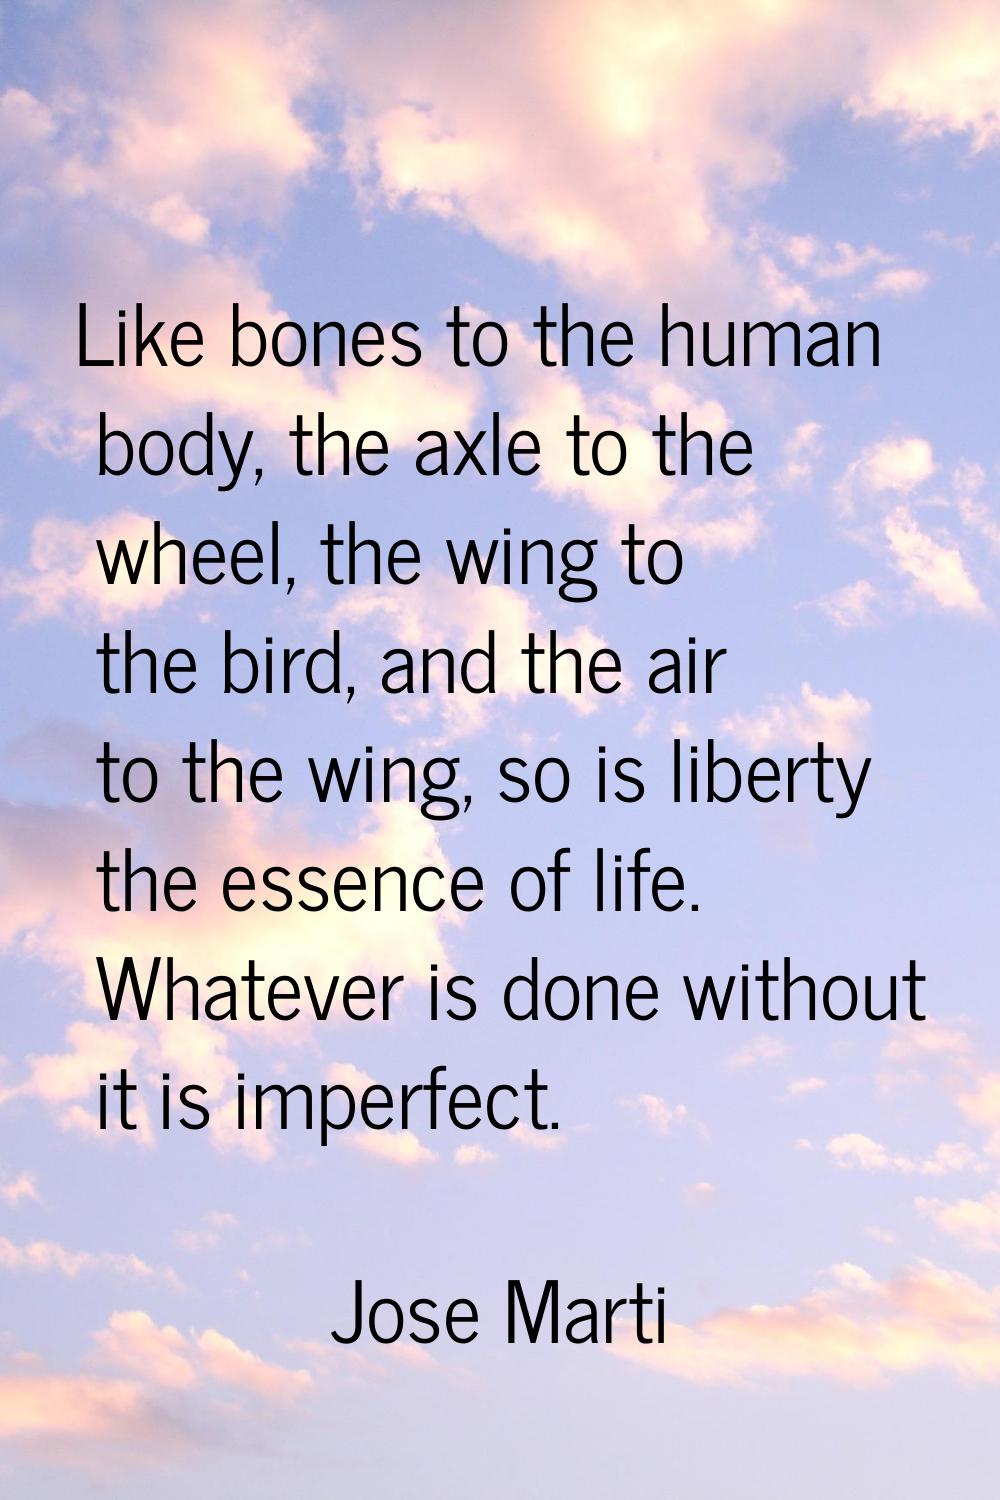 Like bones to the human body, the axle to the wheel, the wing to the bird, and the air to the wing,